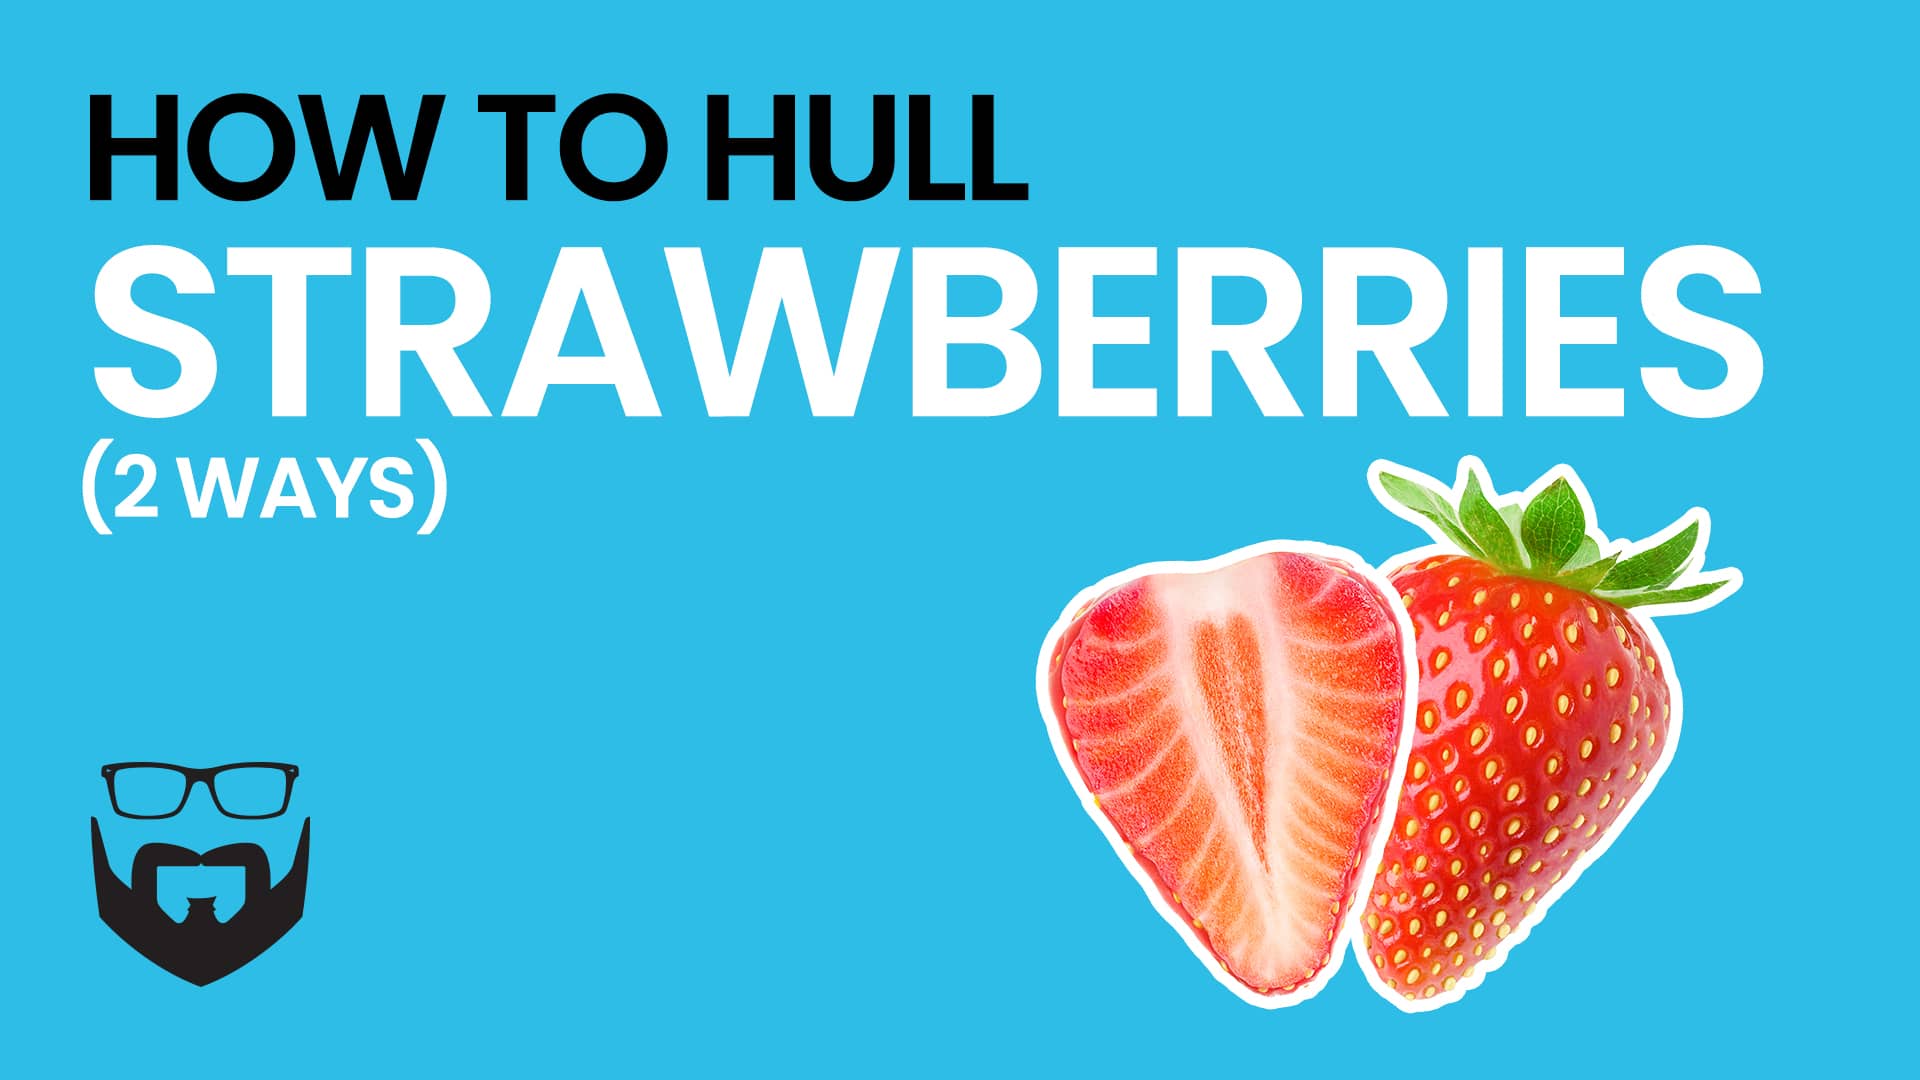 How to Hull Strawberries (2 ways) Video - Blue